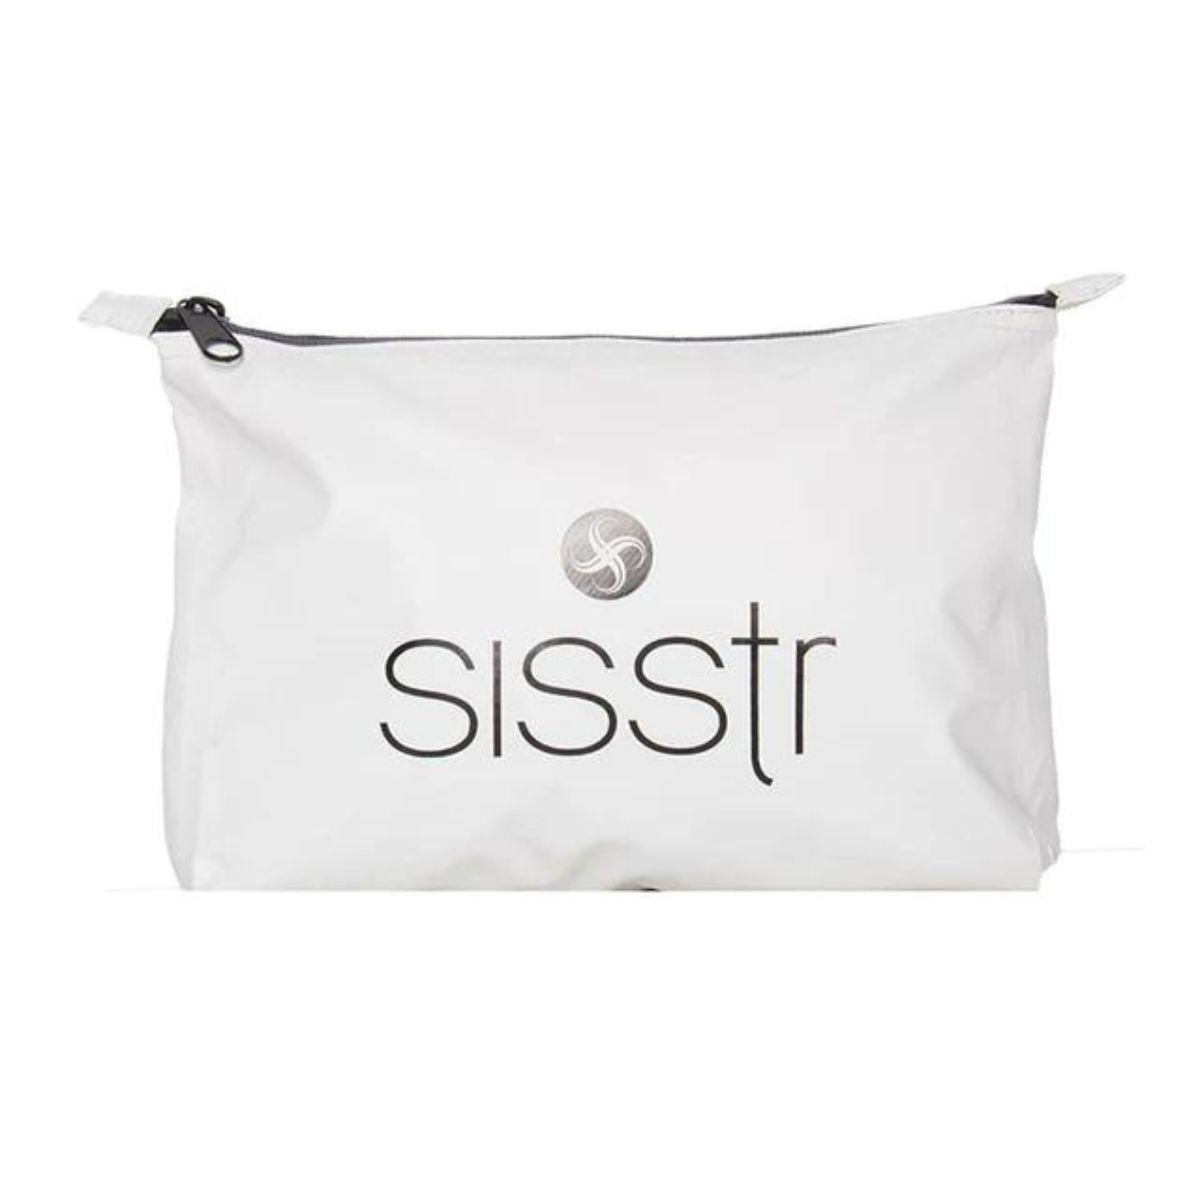 Sisstrevolution Carry The Goodies Bag in White - BoardCo